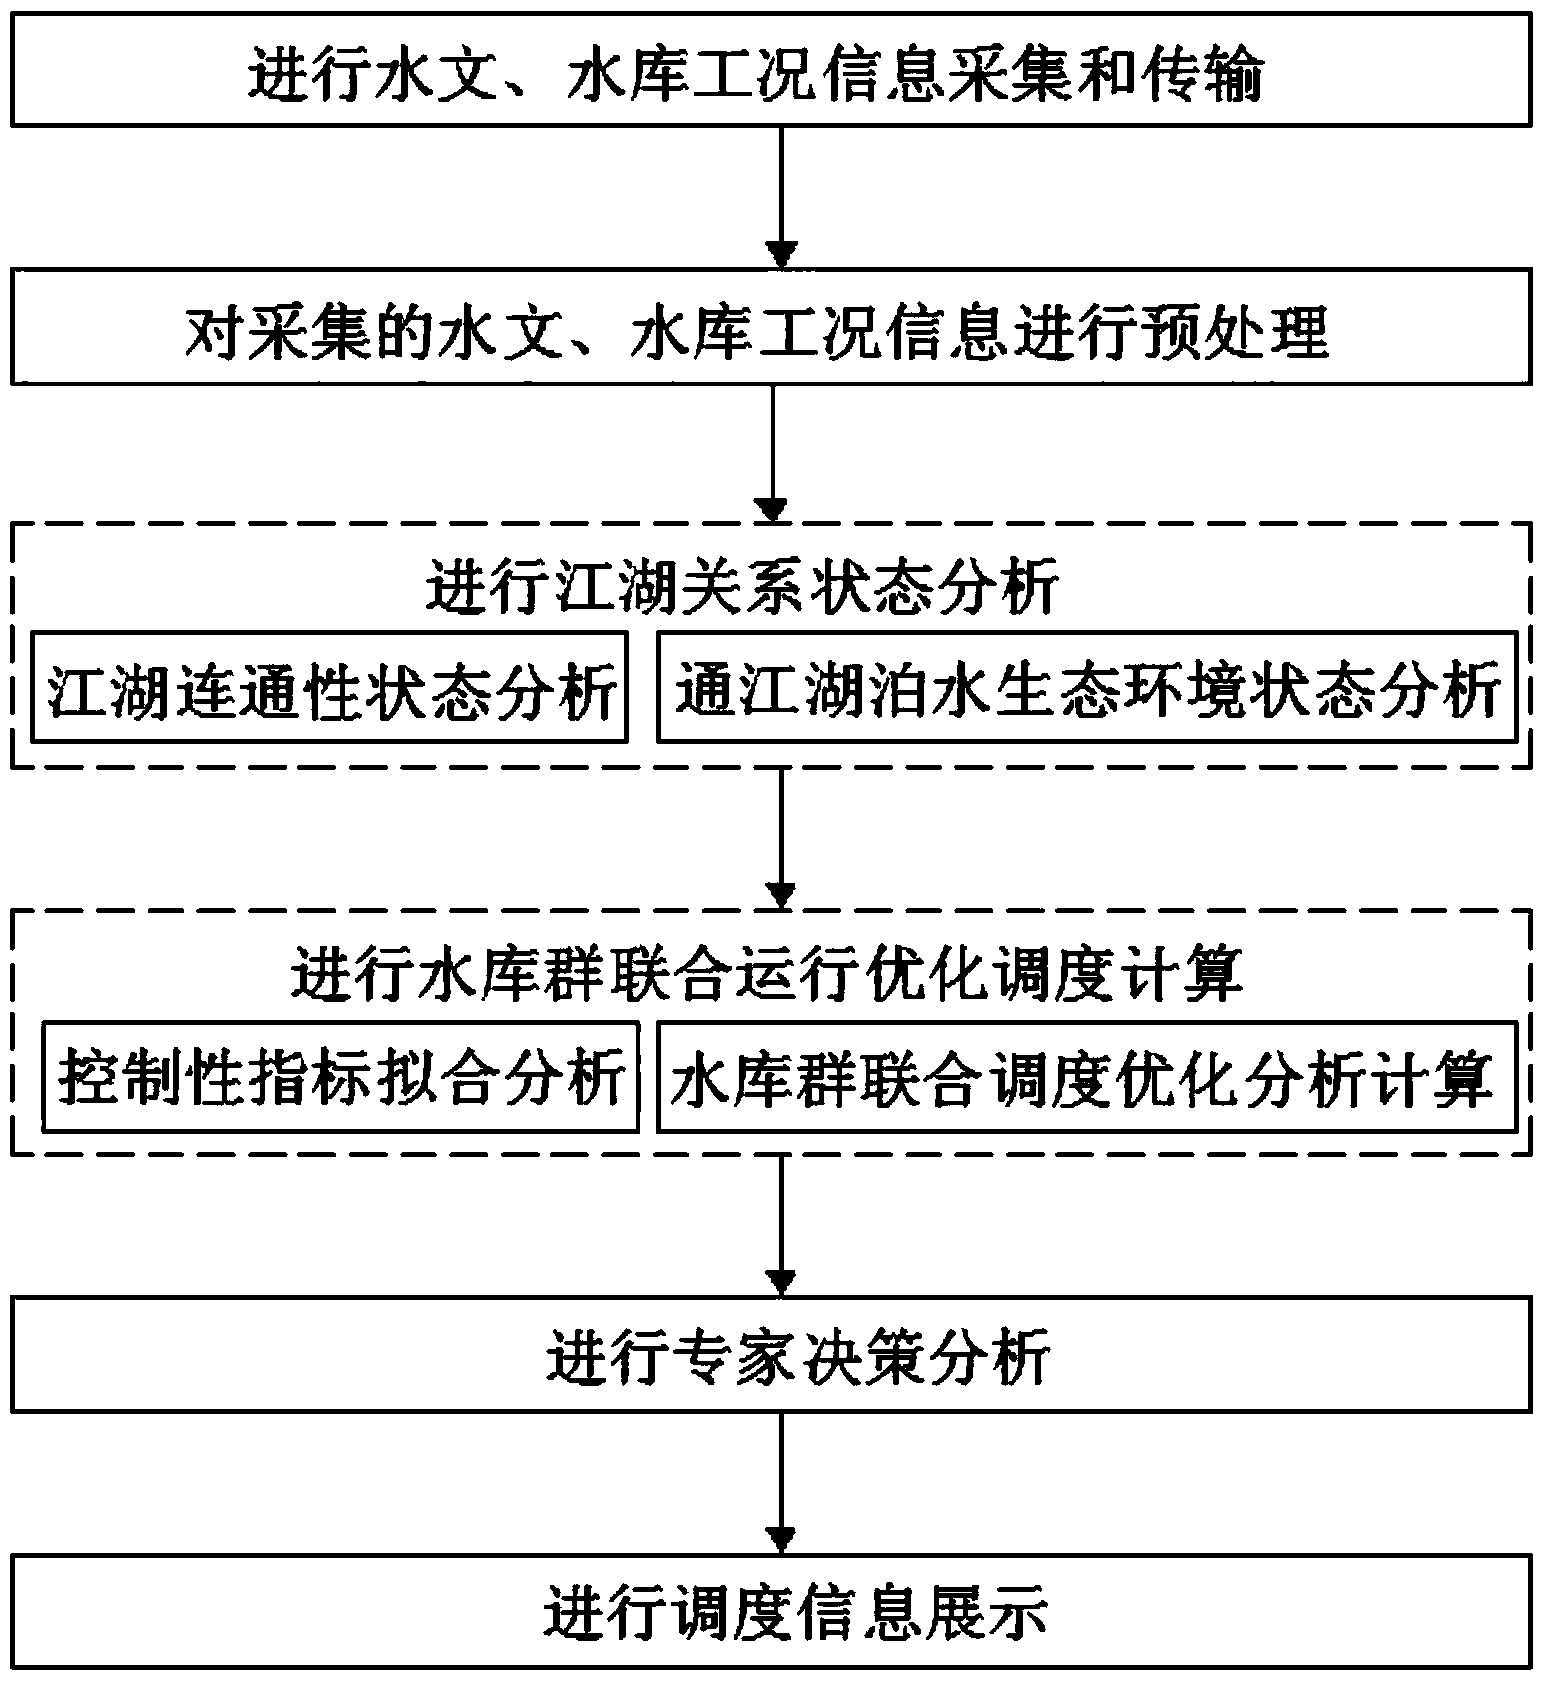 Reservoir group combined operation scheduling system and method for improving river and lake relationship